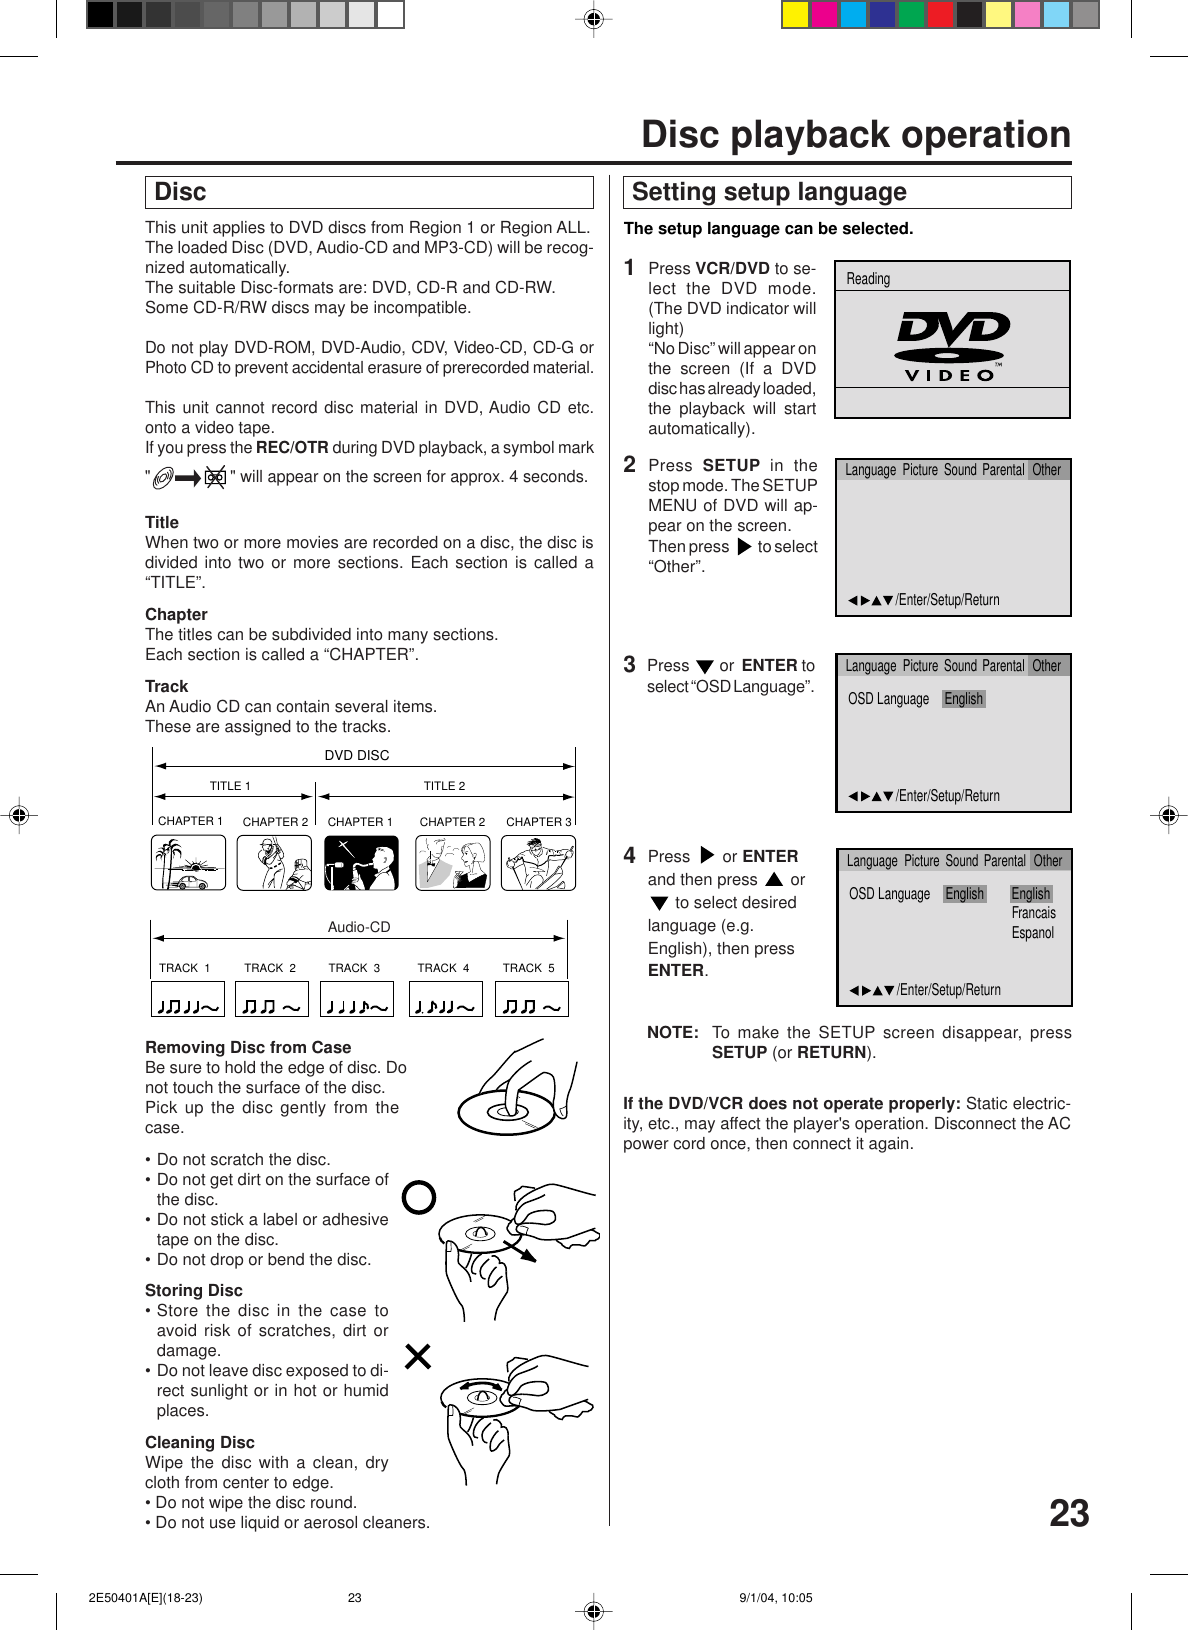 23This unit applies to DVD discs from Region 1 or Region ALL.The loaded Disc (DVD, Audio-CD and MP3-CD) will be recog-nized automatically.The suitable Disc-formats are: DVD, CD-R and CD-RW.Some CD-R/RW discs may be incompatible.Do not play DVD-ROM, DVD-Audio, CDV, Video-CD, CD-G orPhoto CD to prevent accidental erasure of prerecorded material.This unit cannot record disc material in DVD, Audio CD etc.onto a video tape.If you press the REC/OTR during DVD playback, a symbol mark&quot;&quot; will appear on the screen for approx. 4 seconds.TitleWhen two or more movies are recorded on a disc, the disc isdivided into two or more sections. Each section is called a“TITLE”.ChapterThe titles can be subdivided into many sections.Each section is called a “CHAPTER”.TrackAn Audio CD can contain several items.These are assigned to the tracks.CHAPTER 1TITLE 1 TITLE 2DVD DISCCHAPTER 2 CHAPTER 2 CHAPTER 3CHAPTER 1TRACK  1 TRACK  2 TRACK  3 TRACK  4 TRACK  5CDRemoving Disc from CaseBe sure to hold the edge of disc. Donot touch the surface of the disc.Pick up the disc gently from thecase.• Do not scratch the disc.• Do not get dirt on the surface ofthe disc.• Do not stick a label or adhesivetape on the disc.• Do not drop or bend the disc.Storing Disc• Store the disc in the case toavoid risk of scratches, dirt ordamage.• Do not leave disc exposed to di-rect sunlight or in hot or humidplaces.Cleaning DiscWipe the disc with a clean, drycloth from center to edge.• Do not wipe the disc round.• Do not use liquid or aerosol cleaners. DiscAudio-CD Setting setup language4The setup language can be selected.Press   or ENTERand then press   or to select desiredlanguage (e.g.English), then pressENTER.2Press  SETUP in thestop mode. The SETUPMENU of DVD will ap-pear on the screen.Then press   to select“Other”.NOTE: To make the SETUP screen disappear, pressSETUP (or RETURN).If the DVD/VCR does not operate properly: Static electric-ity, etc., may affect the player&apos;s operation. Disconnect the ACpower cord once, then connect it again.3Press   or  ENTER toselect “OSD Language”.1Press  VCR/DVD to se-lect the DVD mode.(The DVD indicator willlight)“No Disc” will appear onthe screen (If a DVDdisc has already loaded,the playback will startautomatically).OSD Language English EnglishFrancaisEspanol/Enter/Setup/ReturnLanguage Picture Parental OtherSoundOSD Language English/Enter/Setup/ReturnLanguage Picture Parental OtherSound/Enter/Setup/ReturnLanguage Picture Parental OtherSoundReadingDisc playback operation 2E50401A[E](18-23) 9/1/04, 10:0523